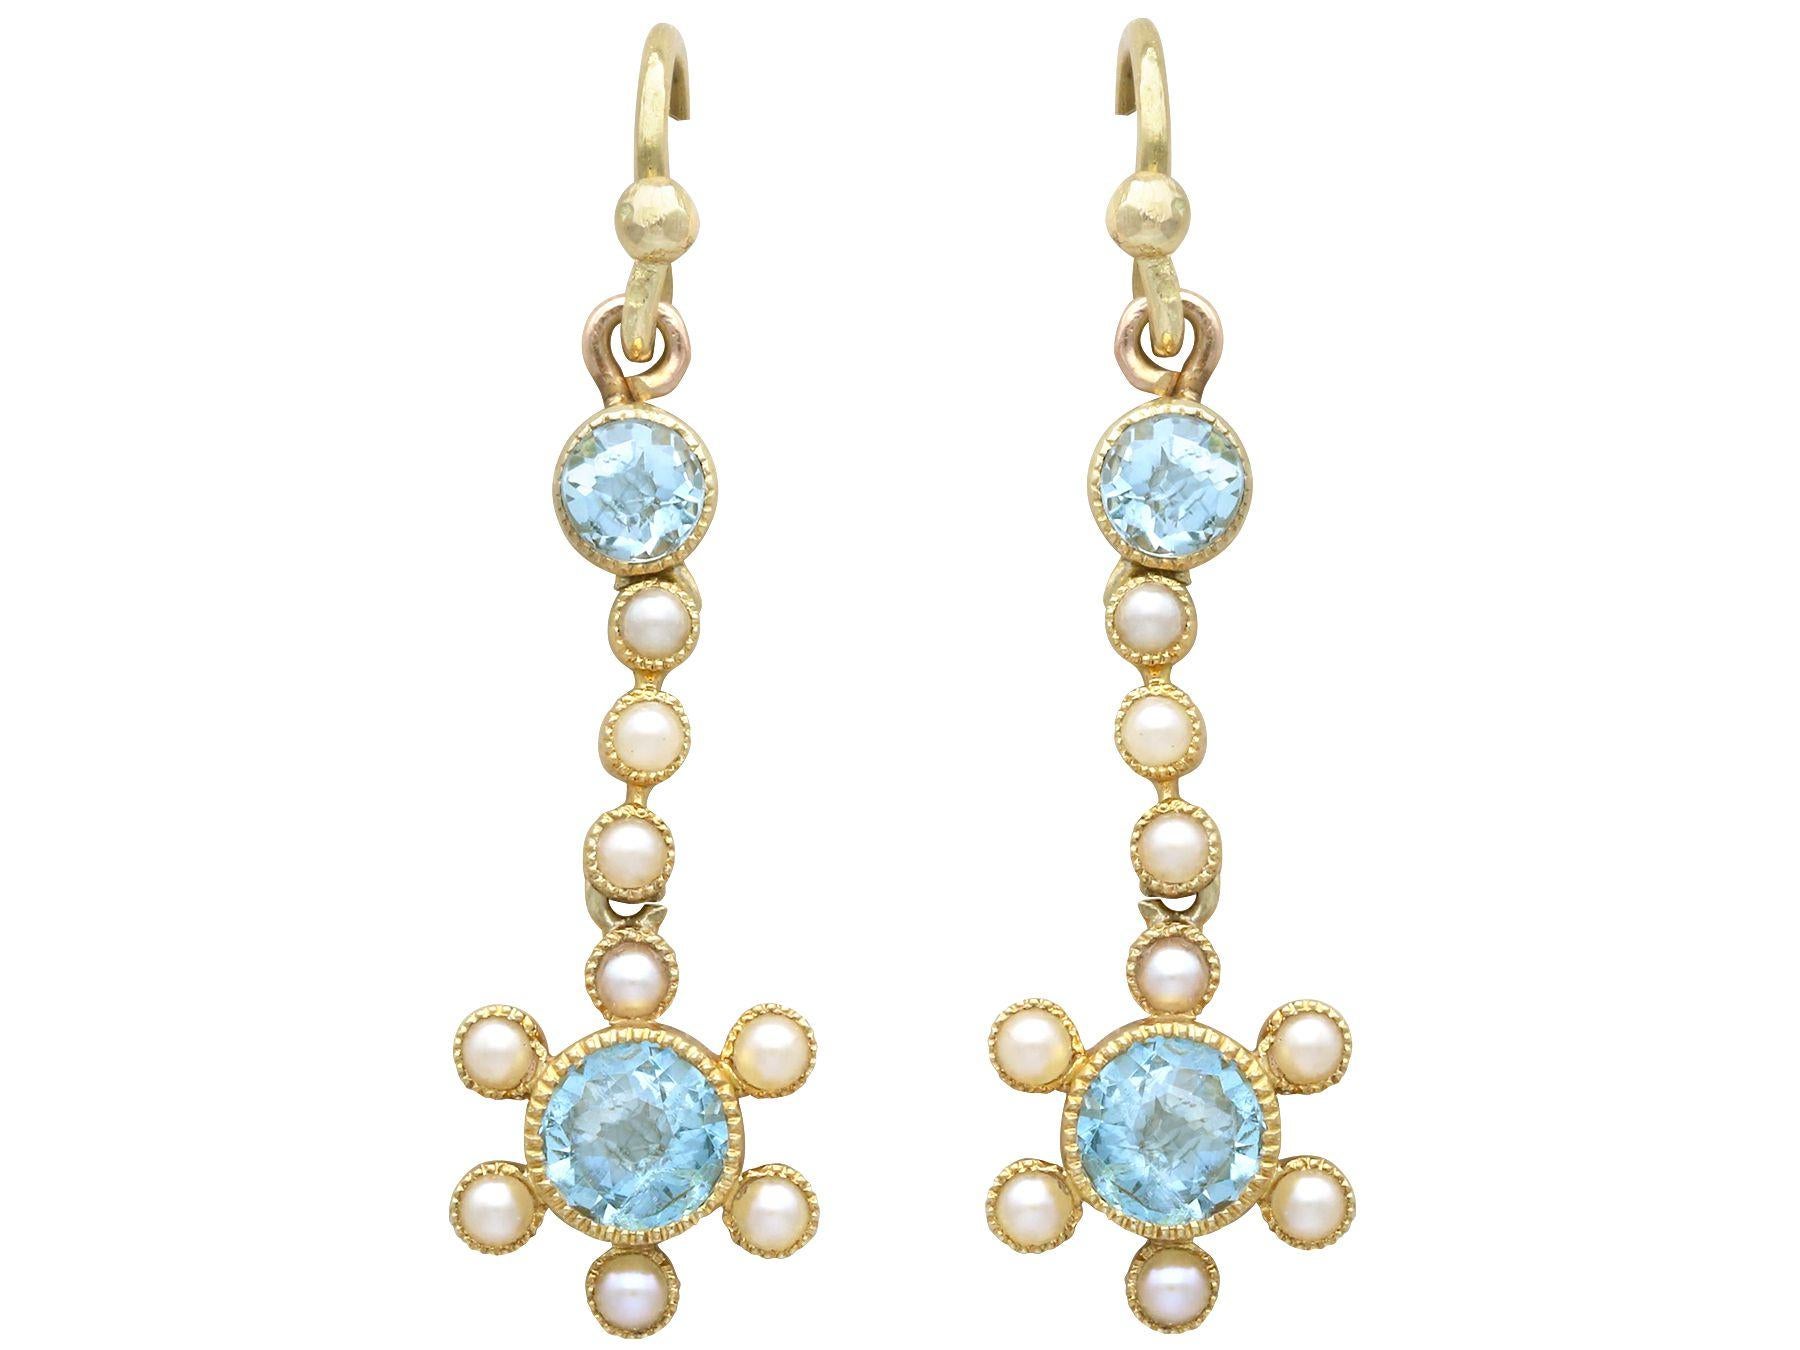 Antique 2.71 Carat Aquamarine and Pearl Yellow Gold Earring and Pendant Set For Sale 3